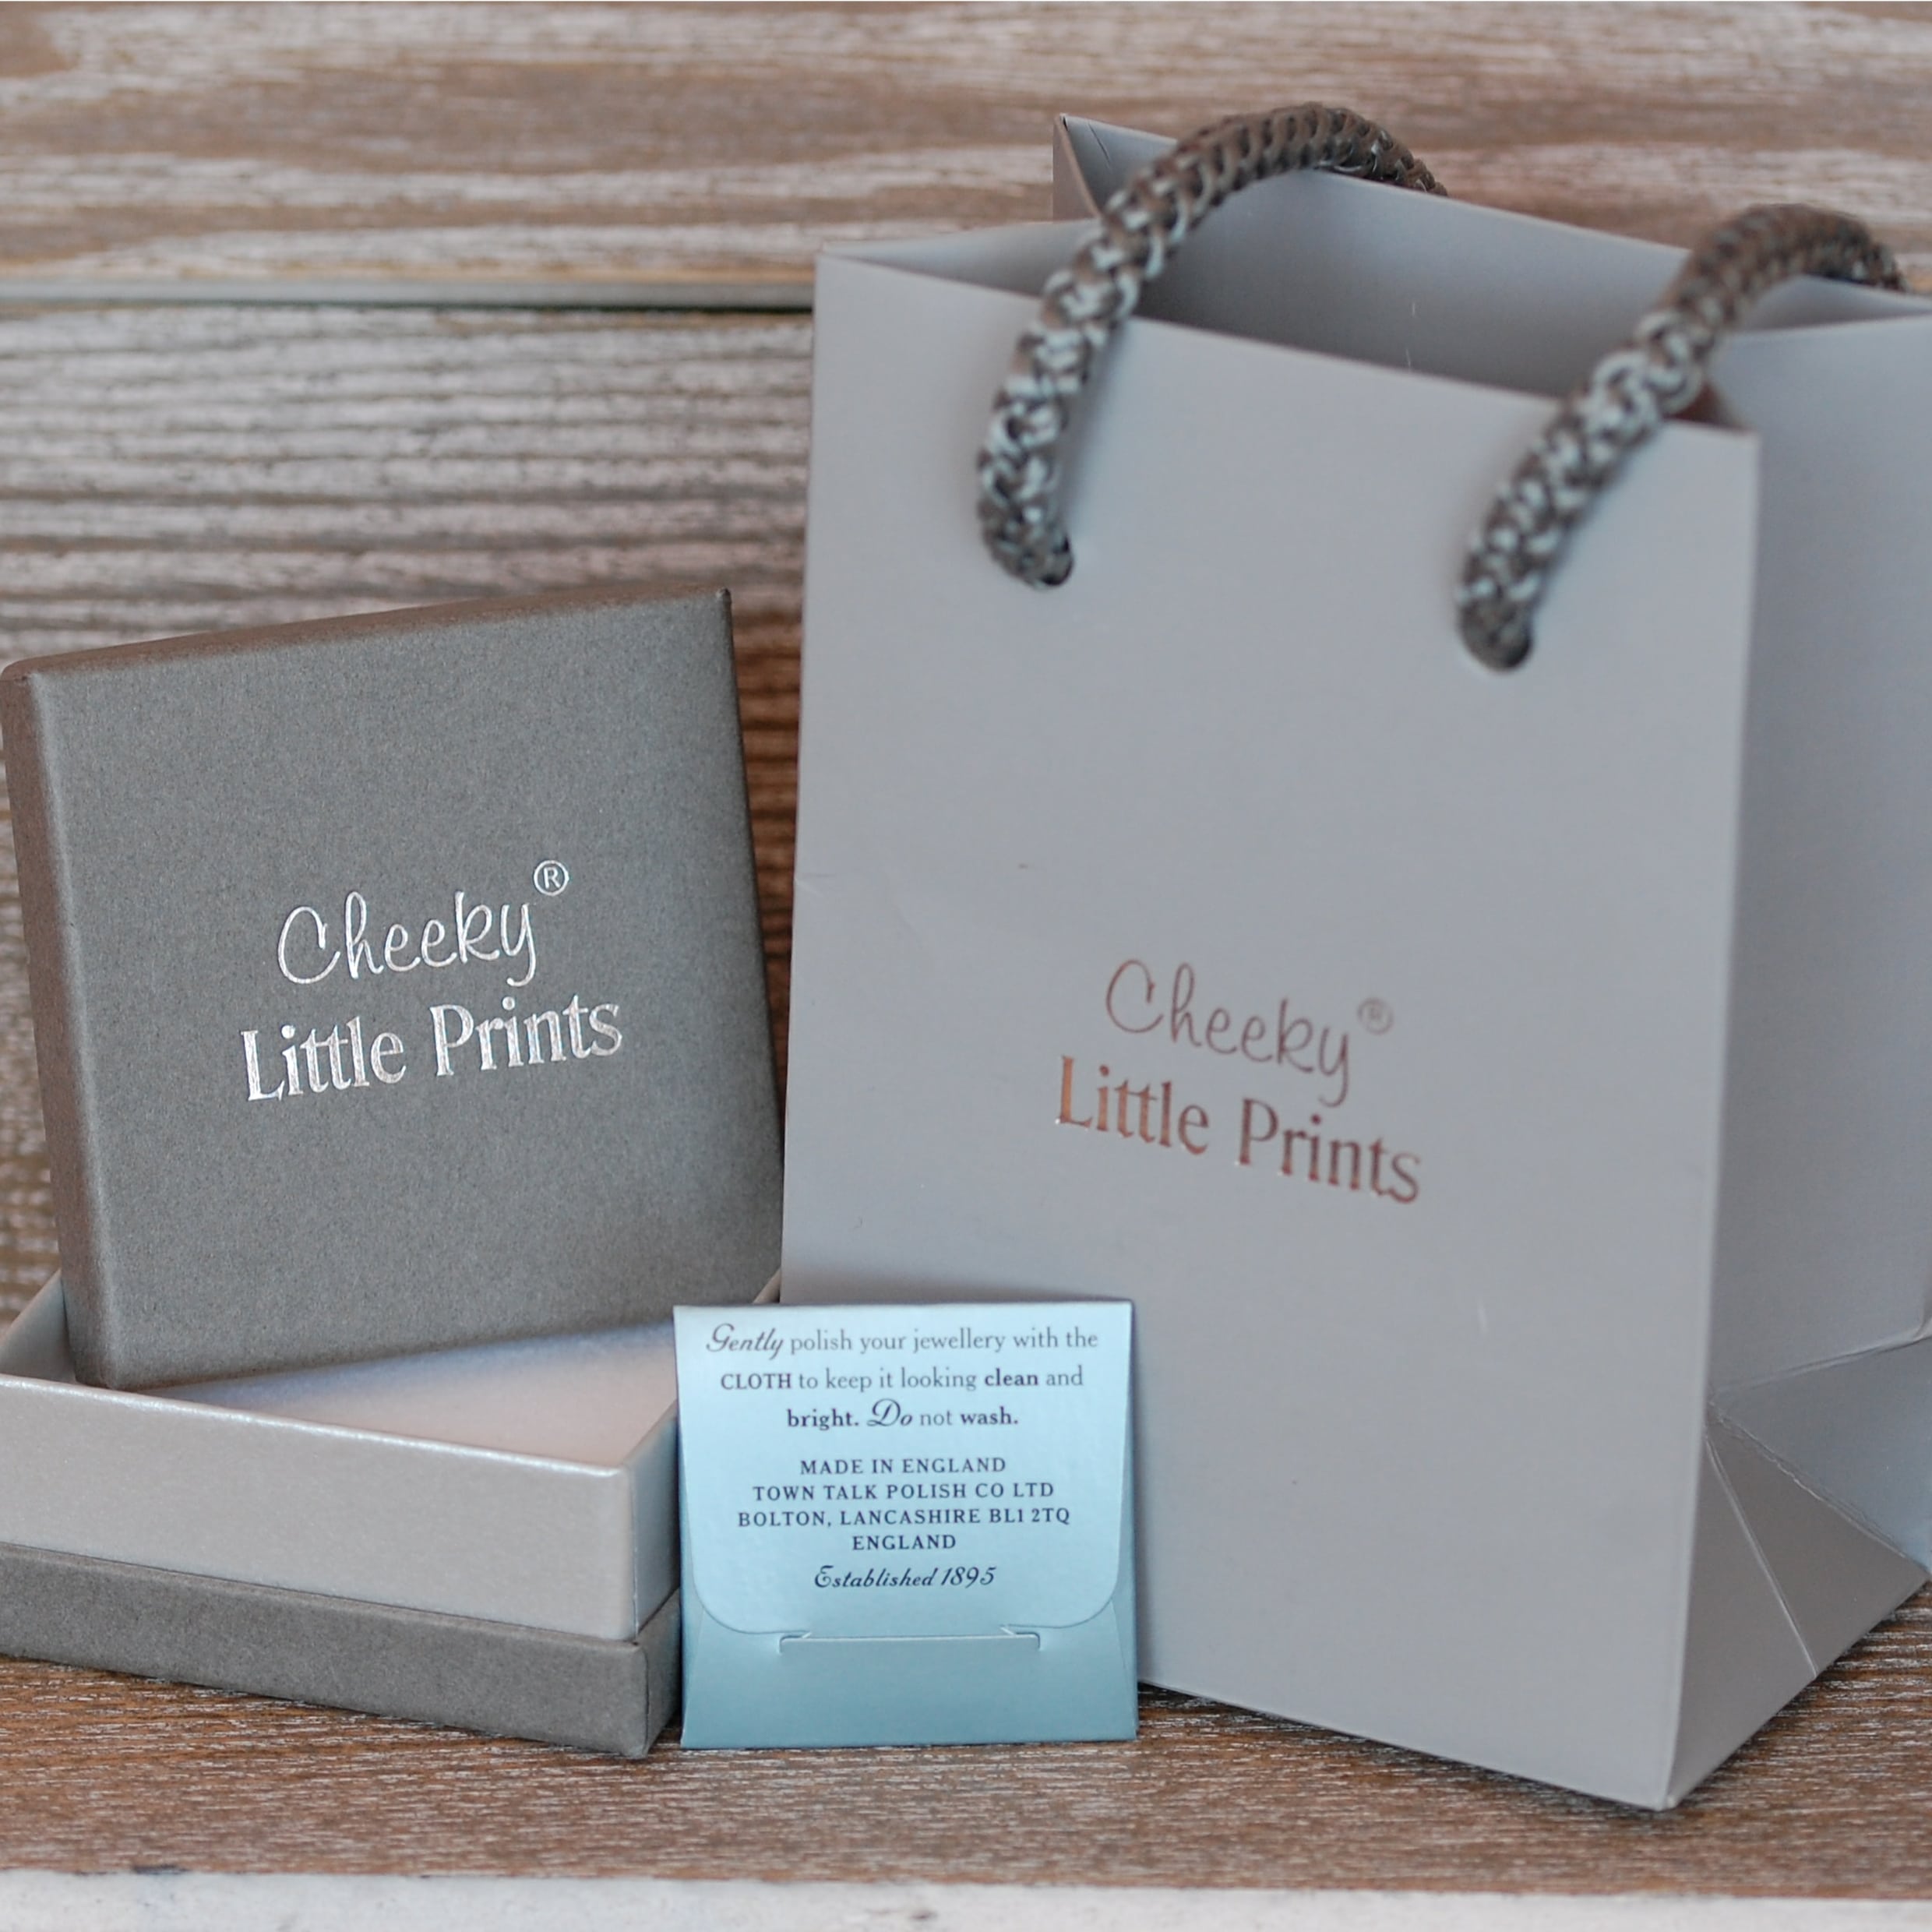 Stunning grey and silver jewellery packaging and polishing cloth to help care for your jewellery